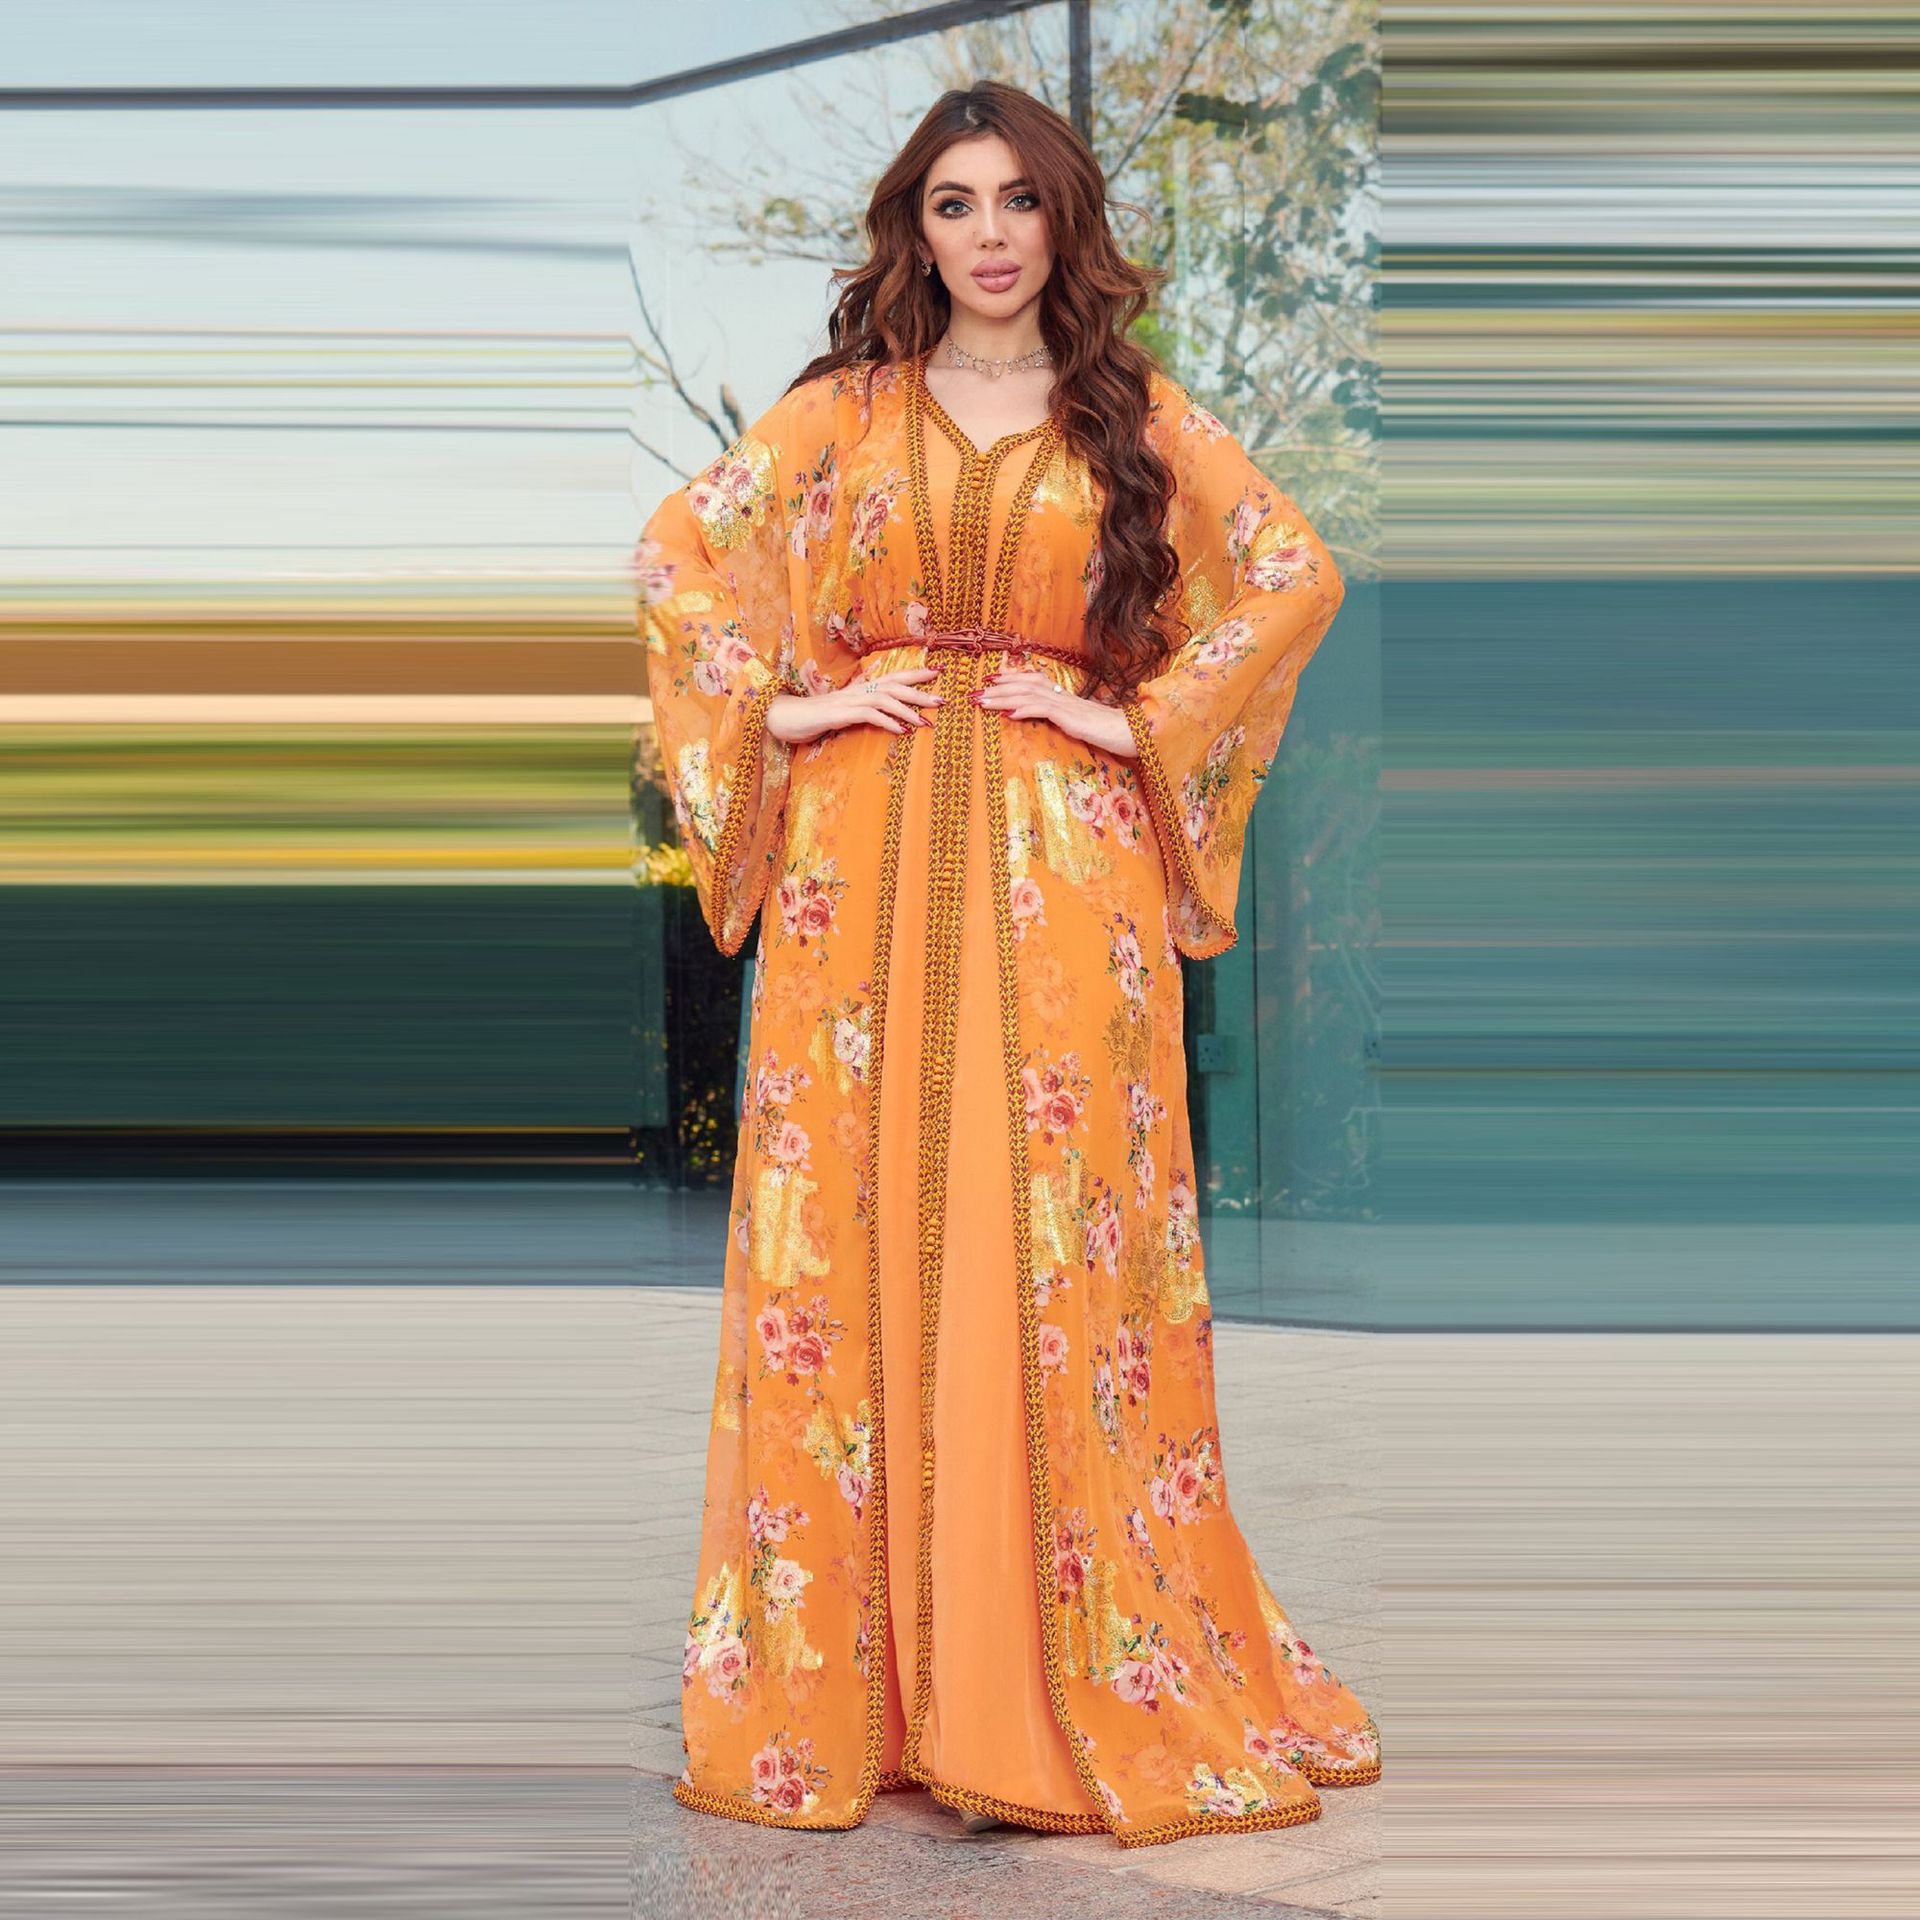 Jalabiya Experience the grandeur of a two-piece jalabiya set with delicate chiffon prints | exquisite gold foil accents | a captivating design aesthetic | and an atmosphere of elegance